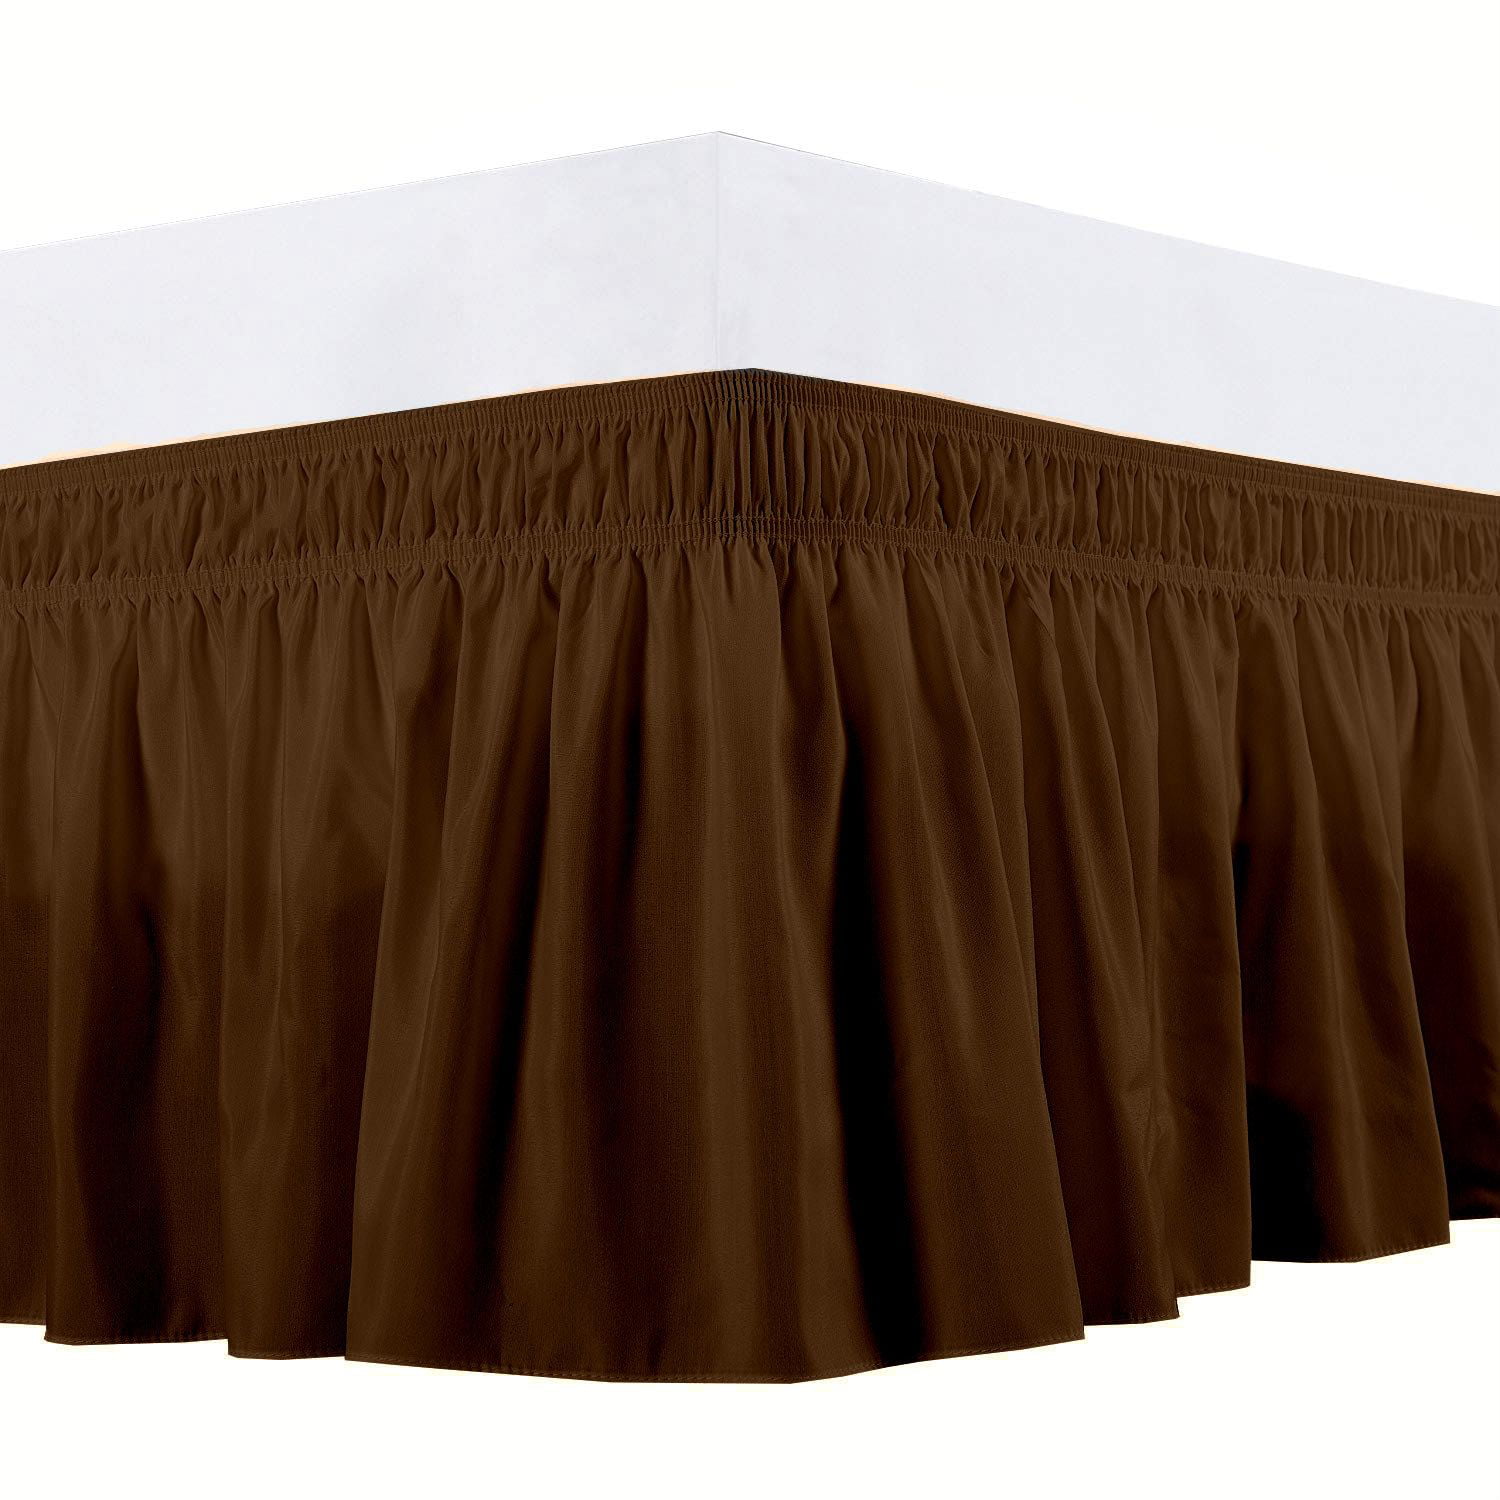 Guken Bed Skirt King Size Wrap Around Elastic Dust Ruffles Solid Color Wrinkle and Fade Resistant with Adjustable Elastic Belt Easy to Install Black for King/Cal King Size Beds 15 Inch Drop Black 